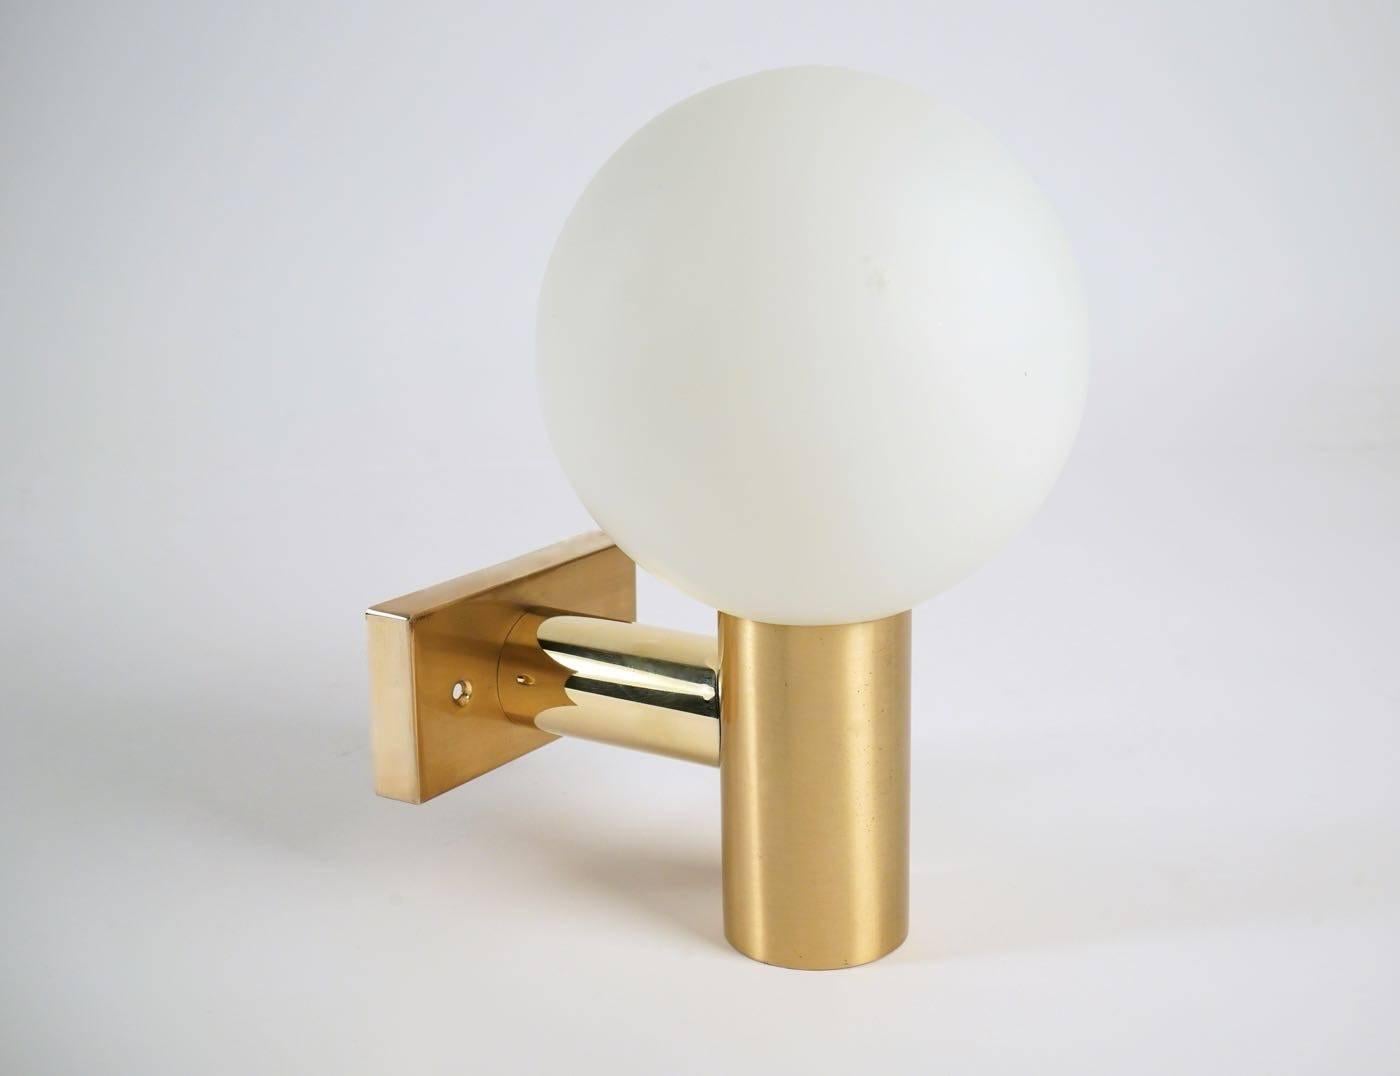 1950s pair
The sconces structure is made of gilded brass and supports a large ball of white satin glass globe as shade.
One bulb per sconces.